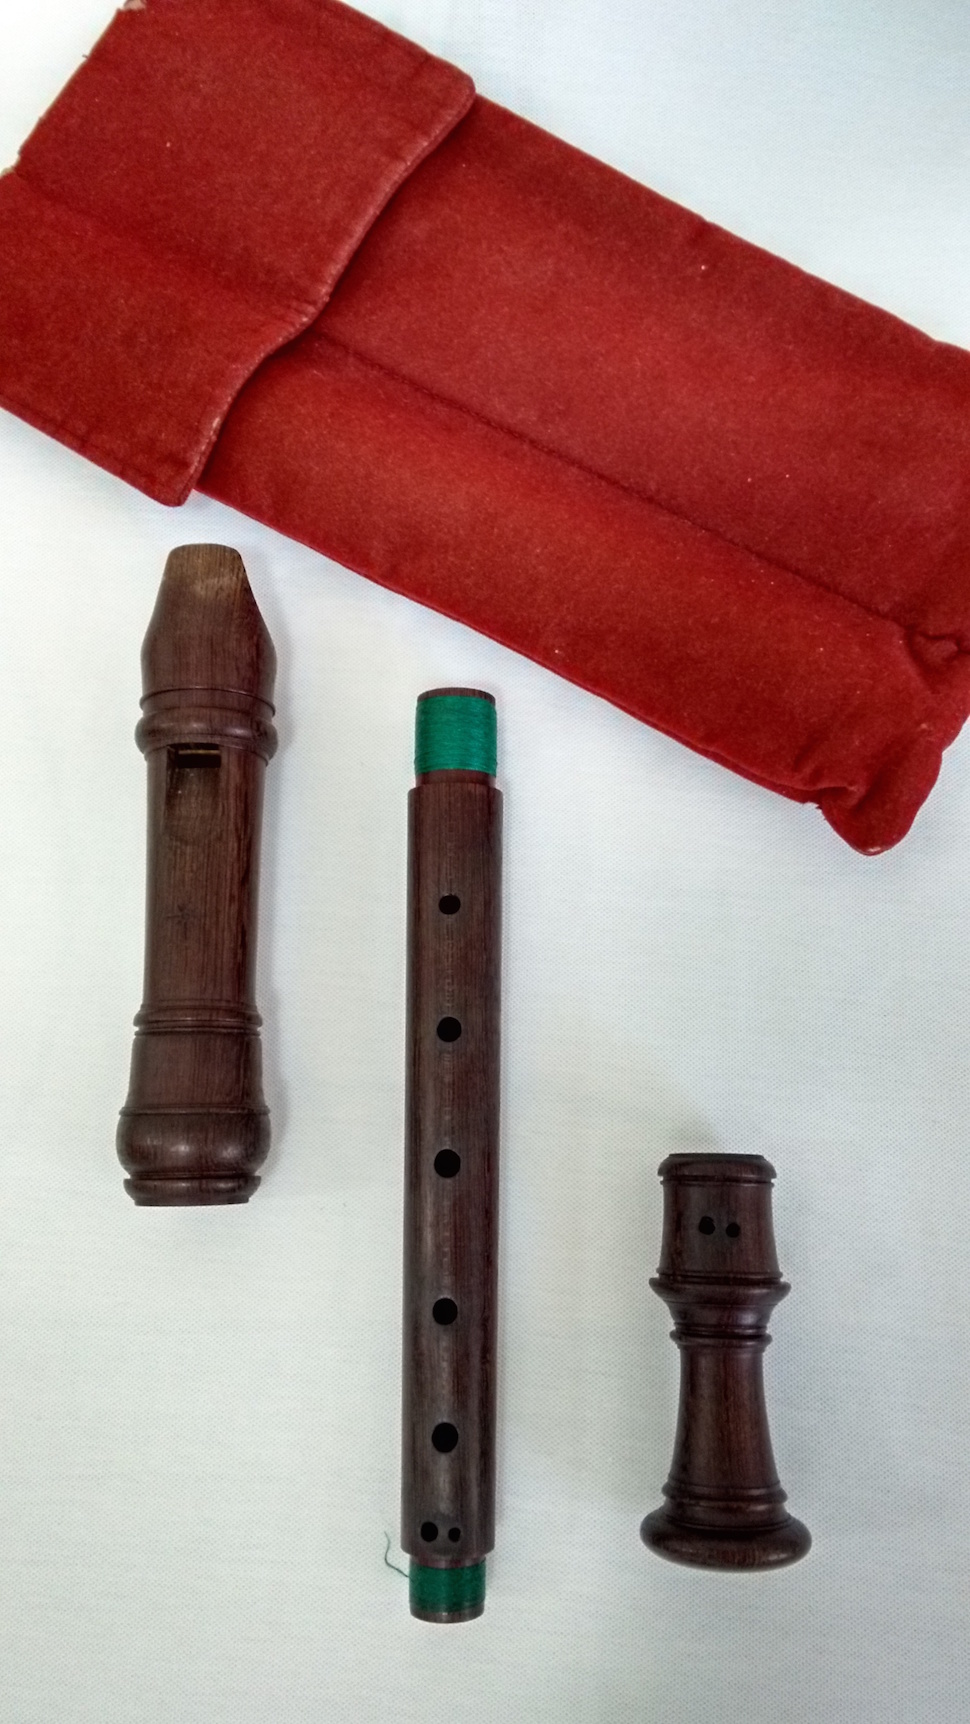 Denner-alto-recorder-by-Marcos-Ximenes-recorders-for-sale-com-01 \u2014 Recorders for sale